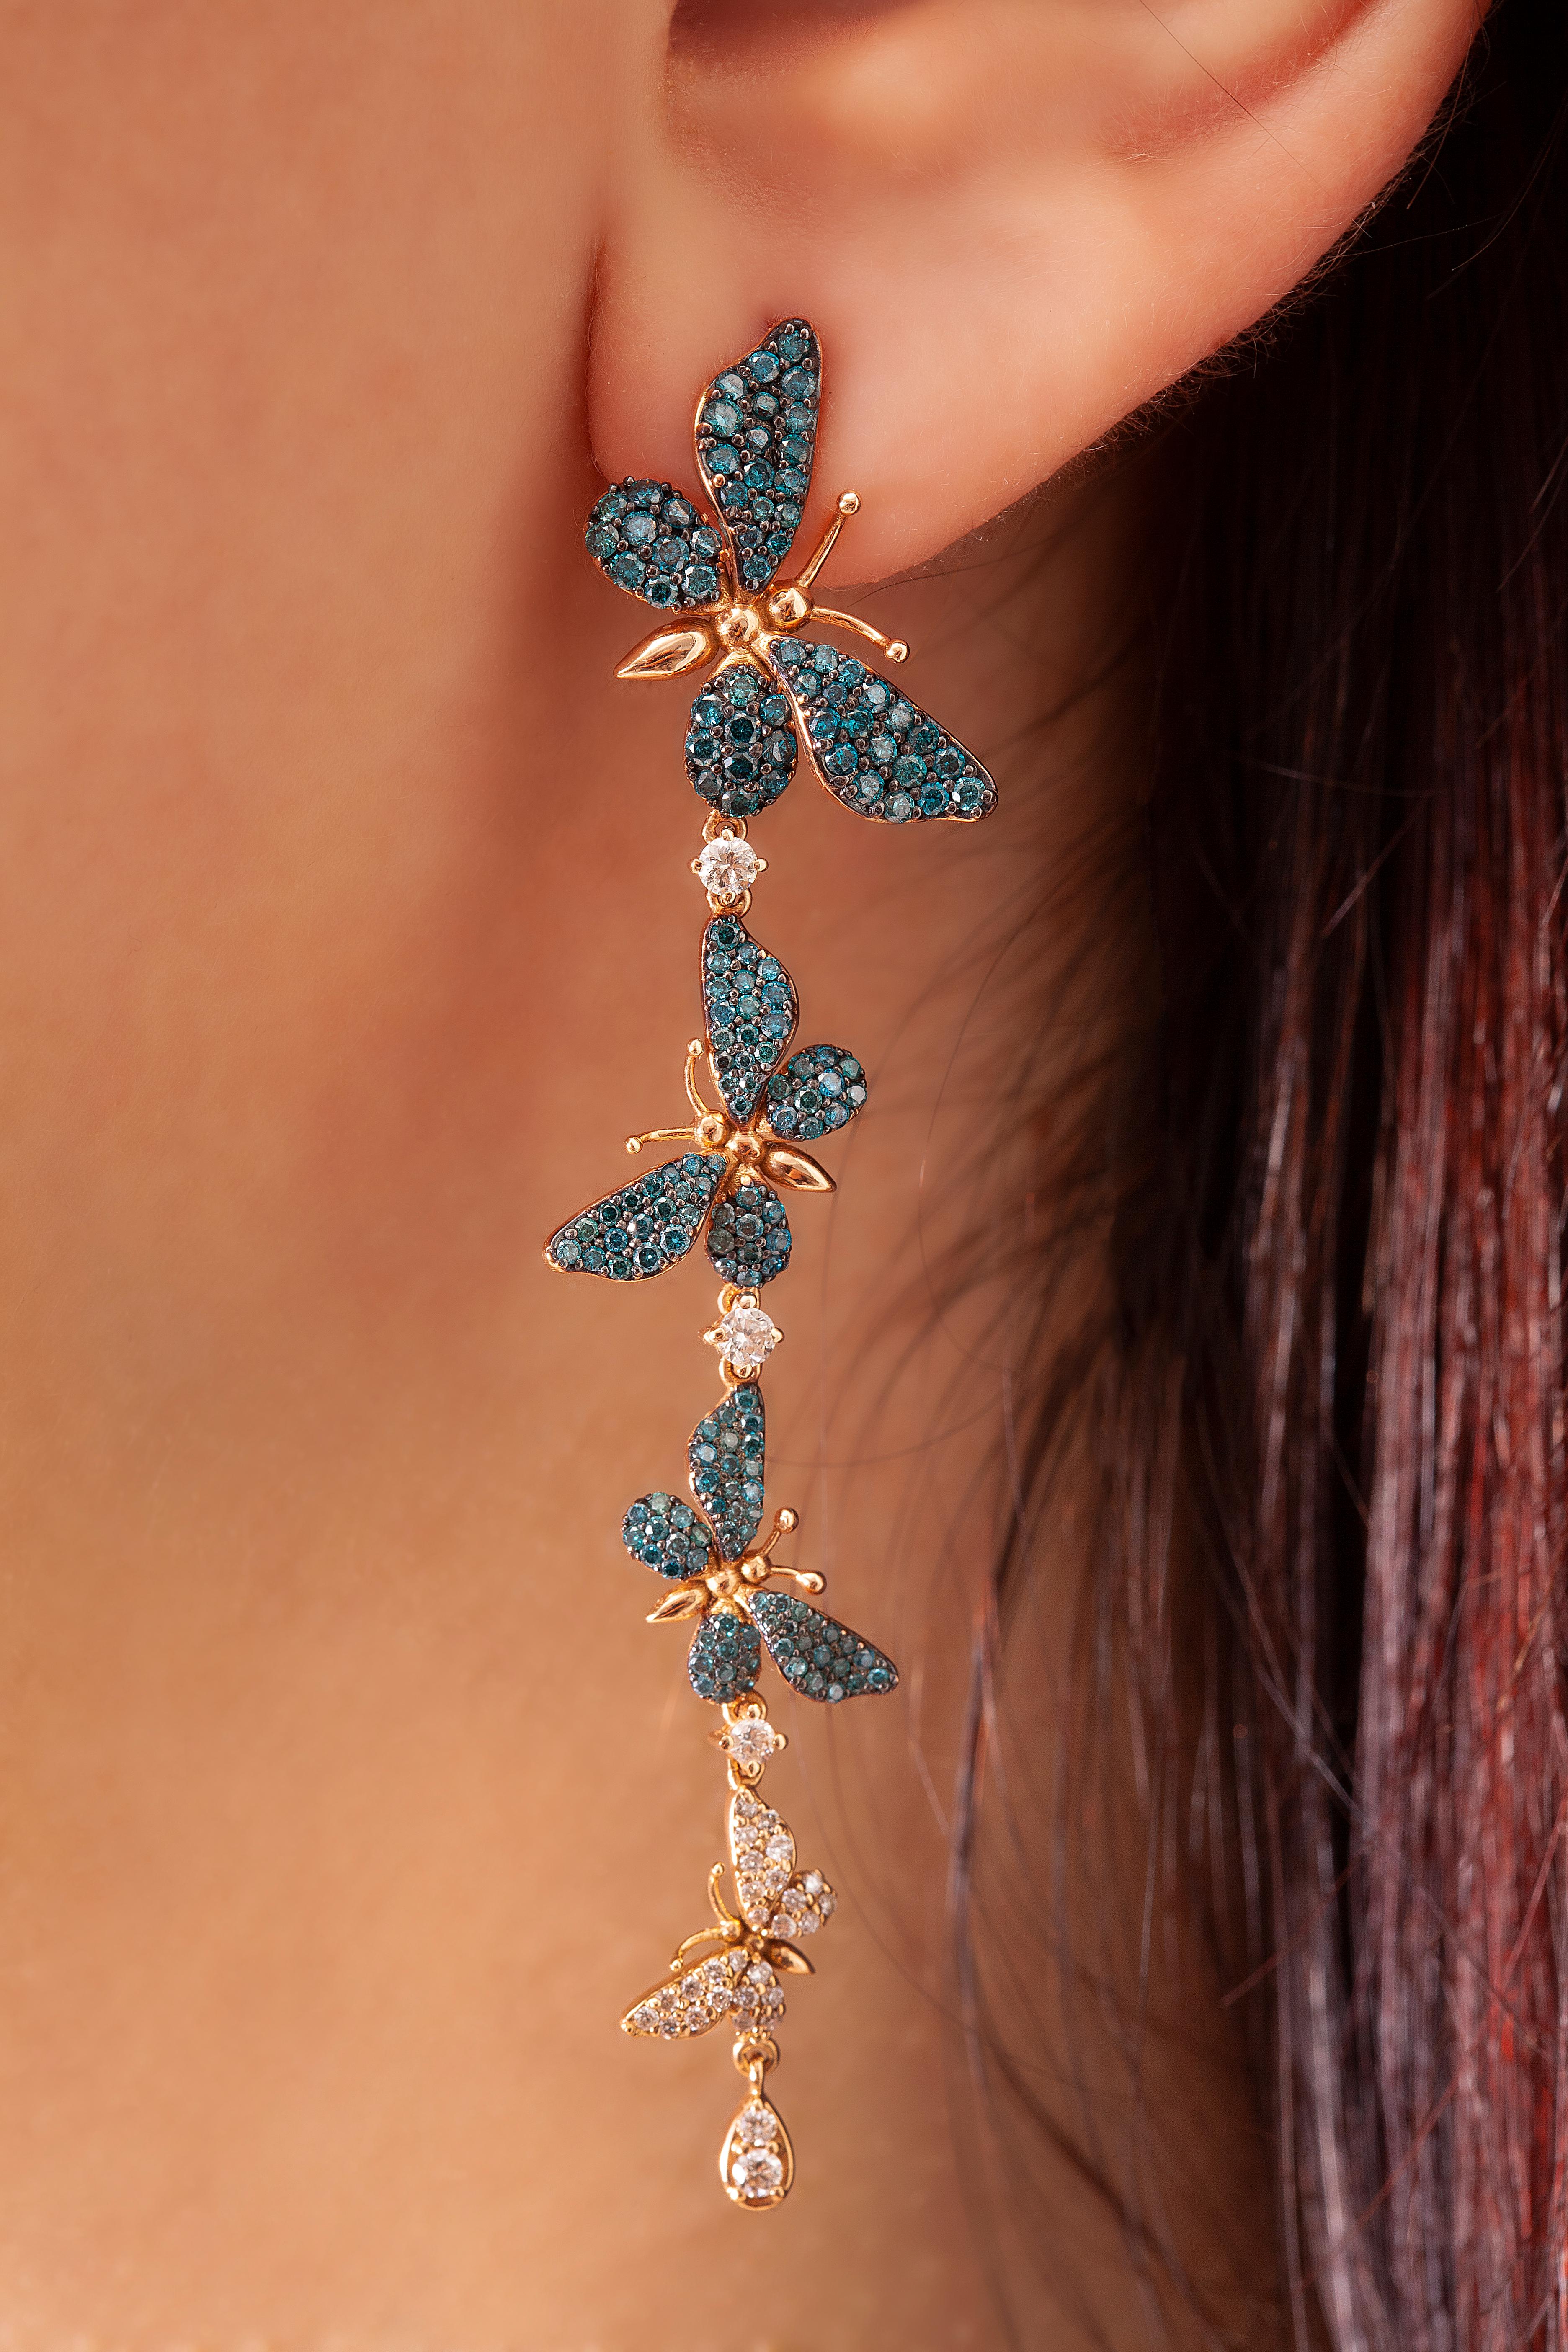 Long Blue Flutter Earrings are set in 18k rose gold with 1,76 carat blue diamonds and 0,50 carat white diamonds.

Enticing and fun, the Flutter Earrings mimic those evanescent yet remarkable feelings of butterflies with its fluid movement and